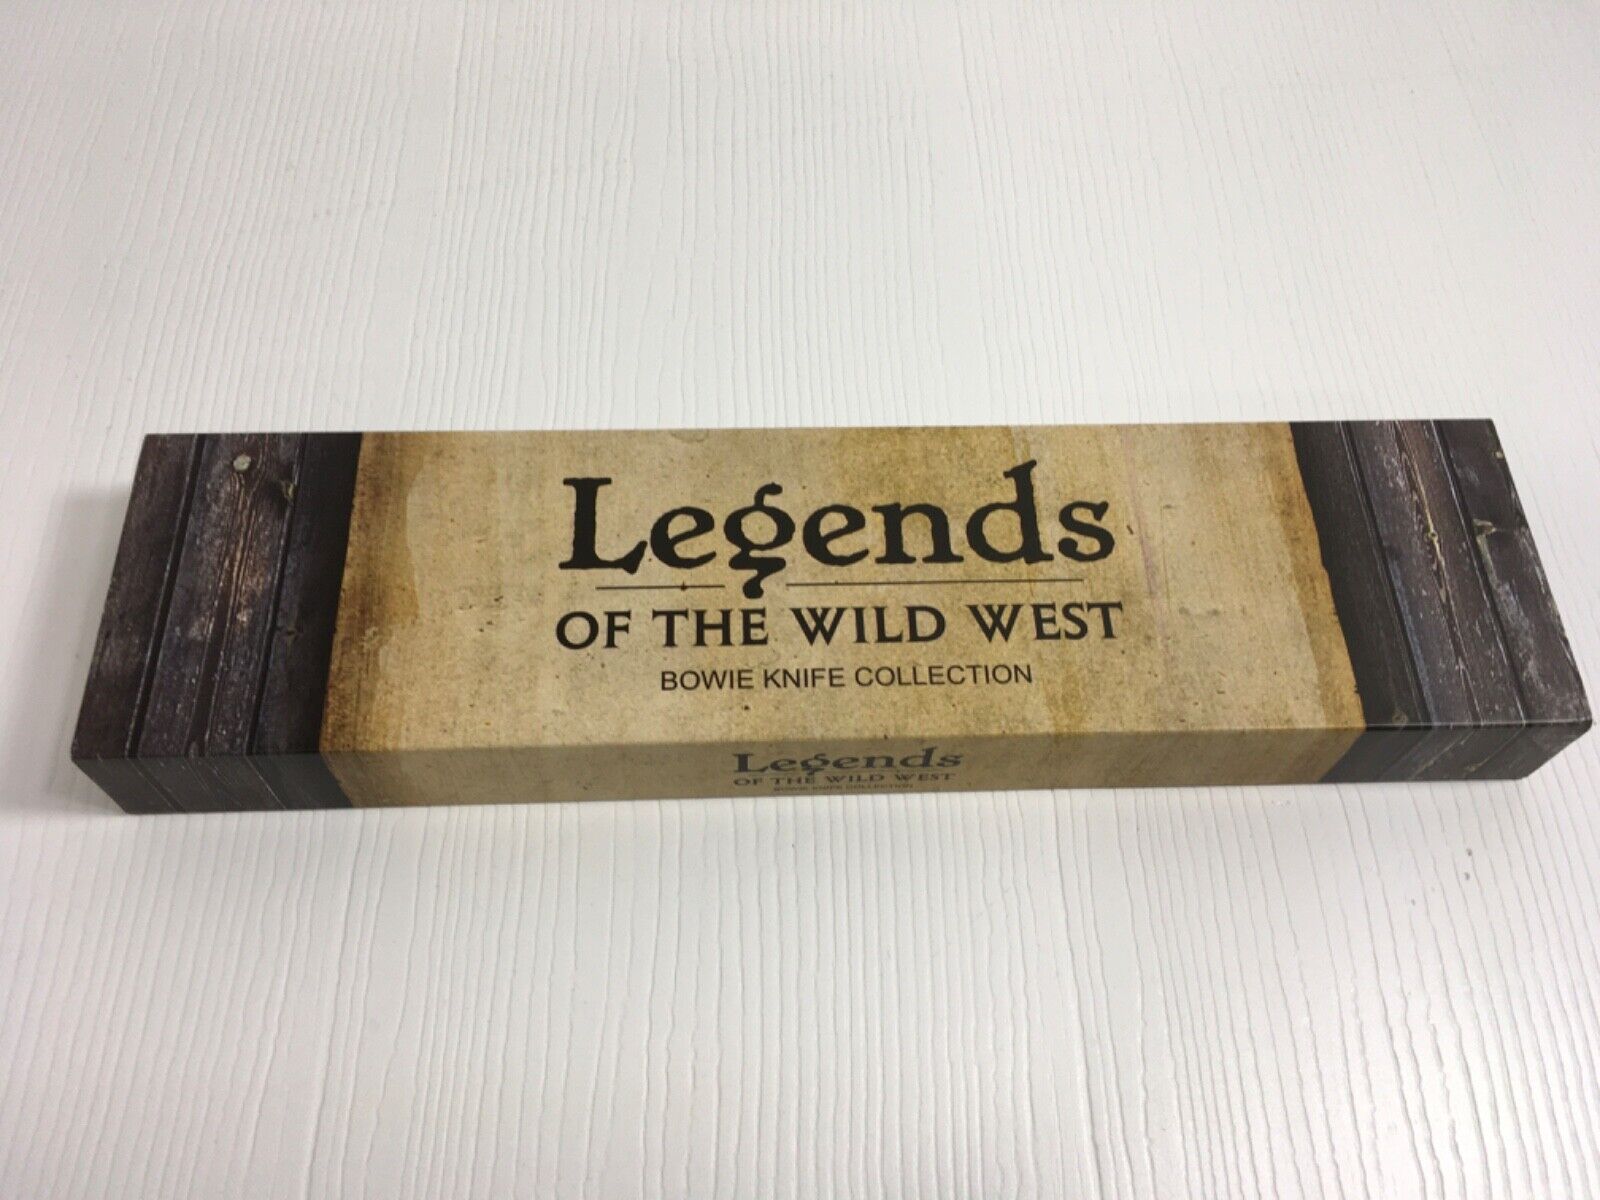 Buffalo Bill Knife (Bowie Knife Collection) Legends of Wild West